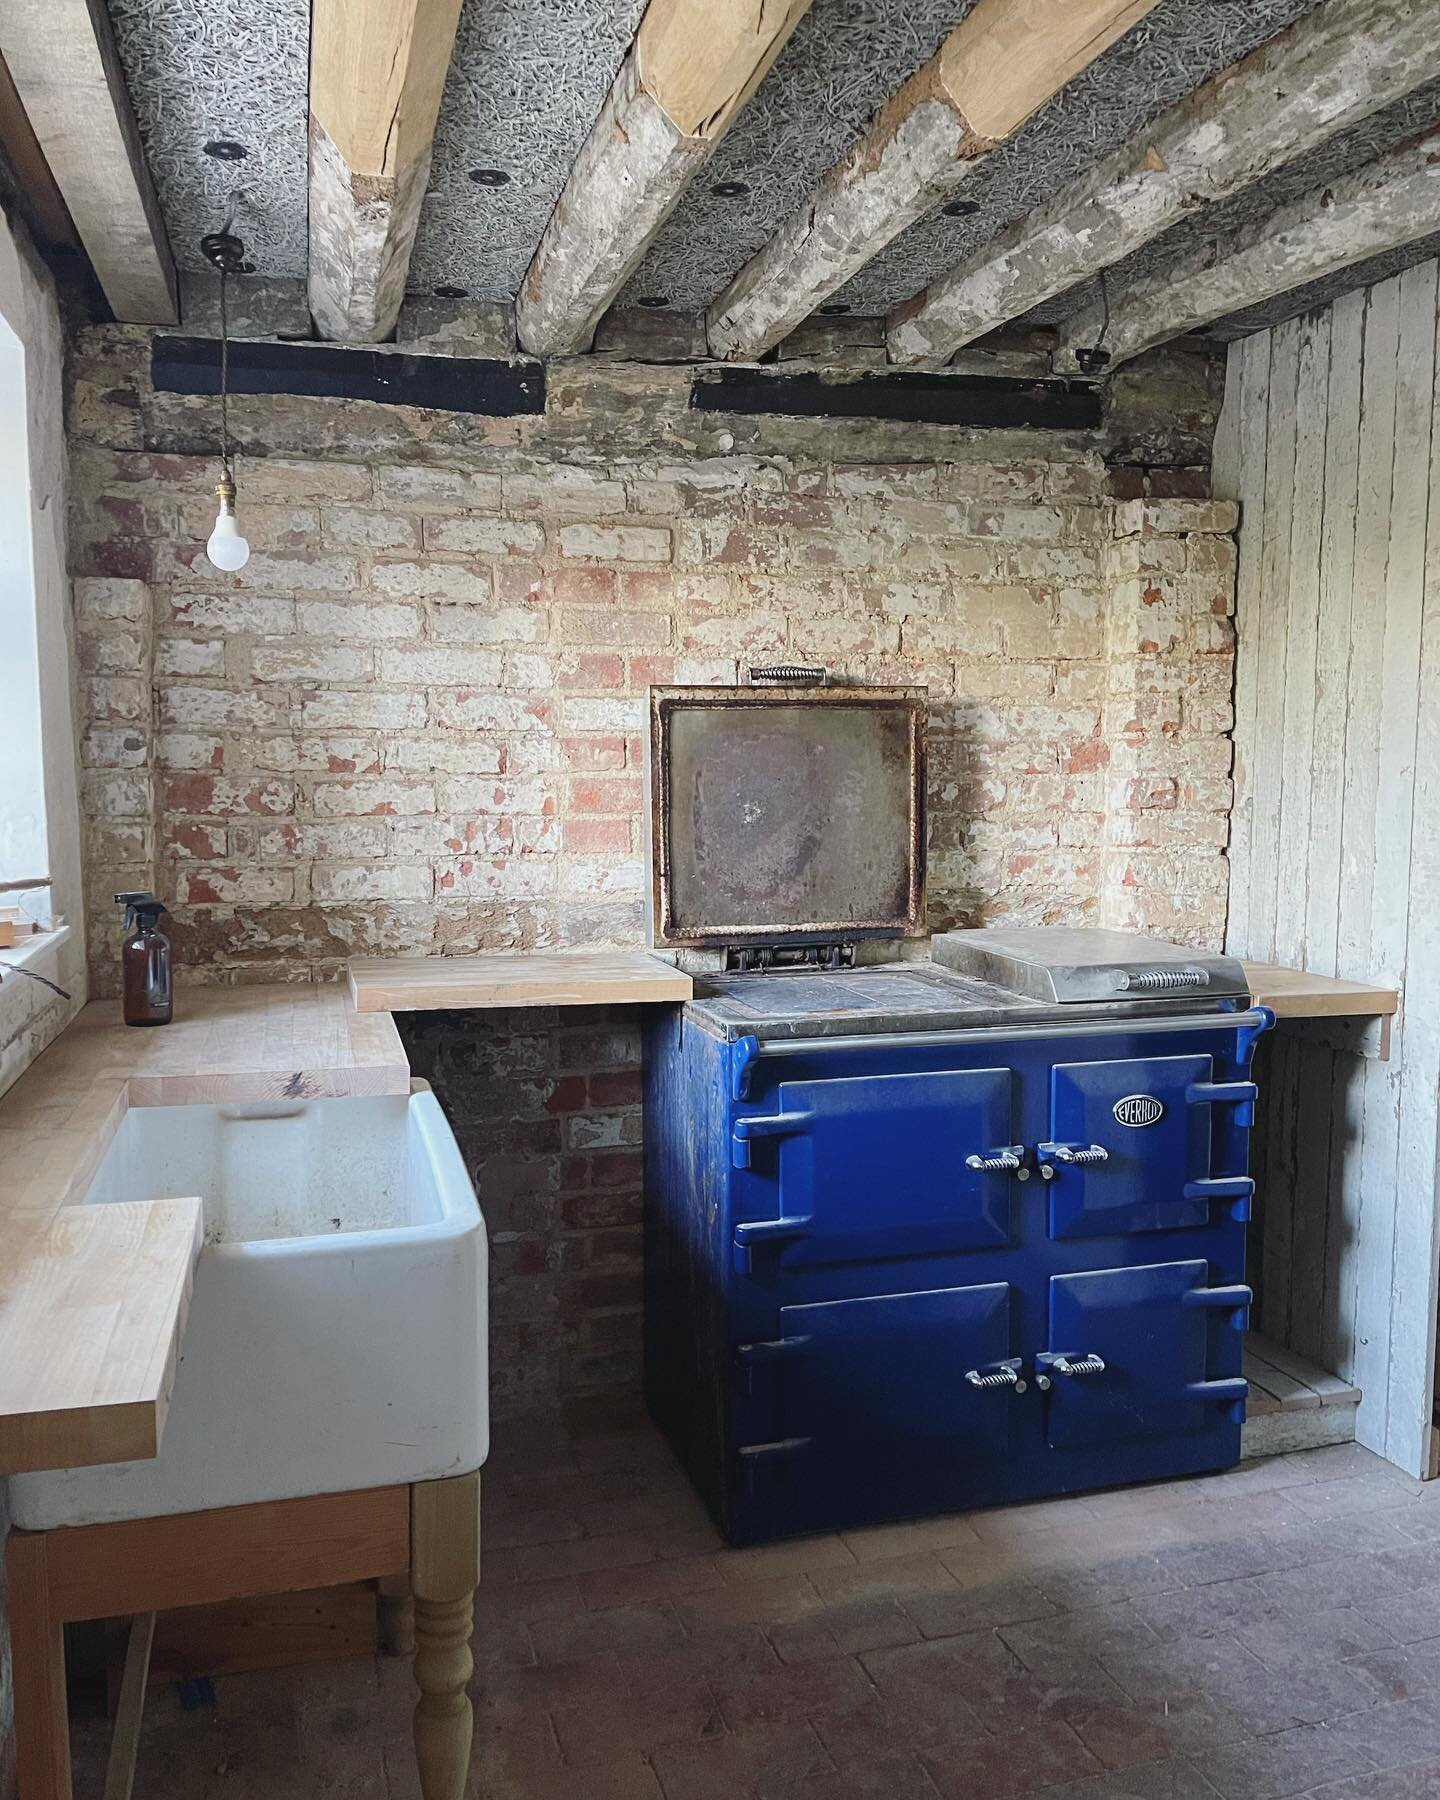 Kitchen progress!!! However, I need to make my mother in law a birthday cake for Saturday. Can one do Dorset apple cake in a microwave? On a barbecue?